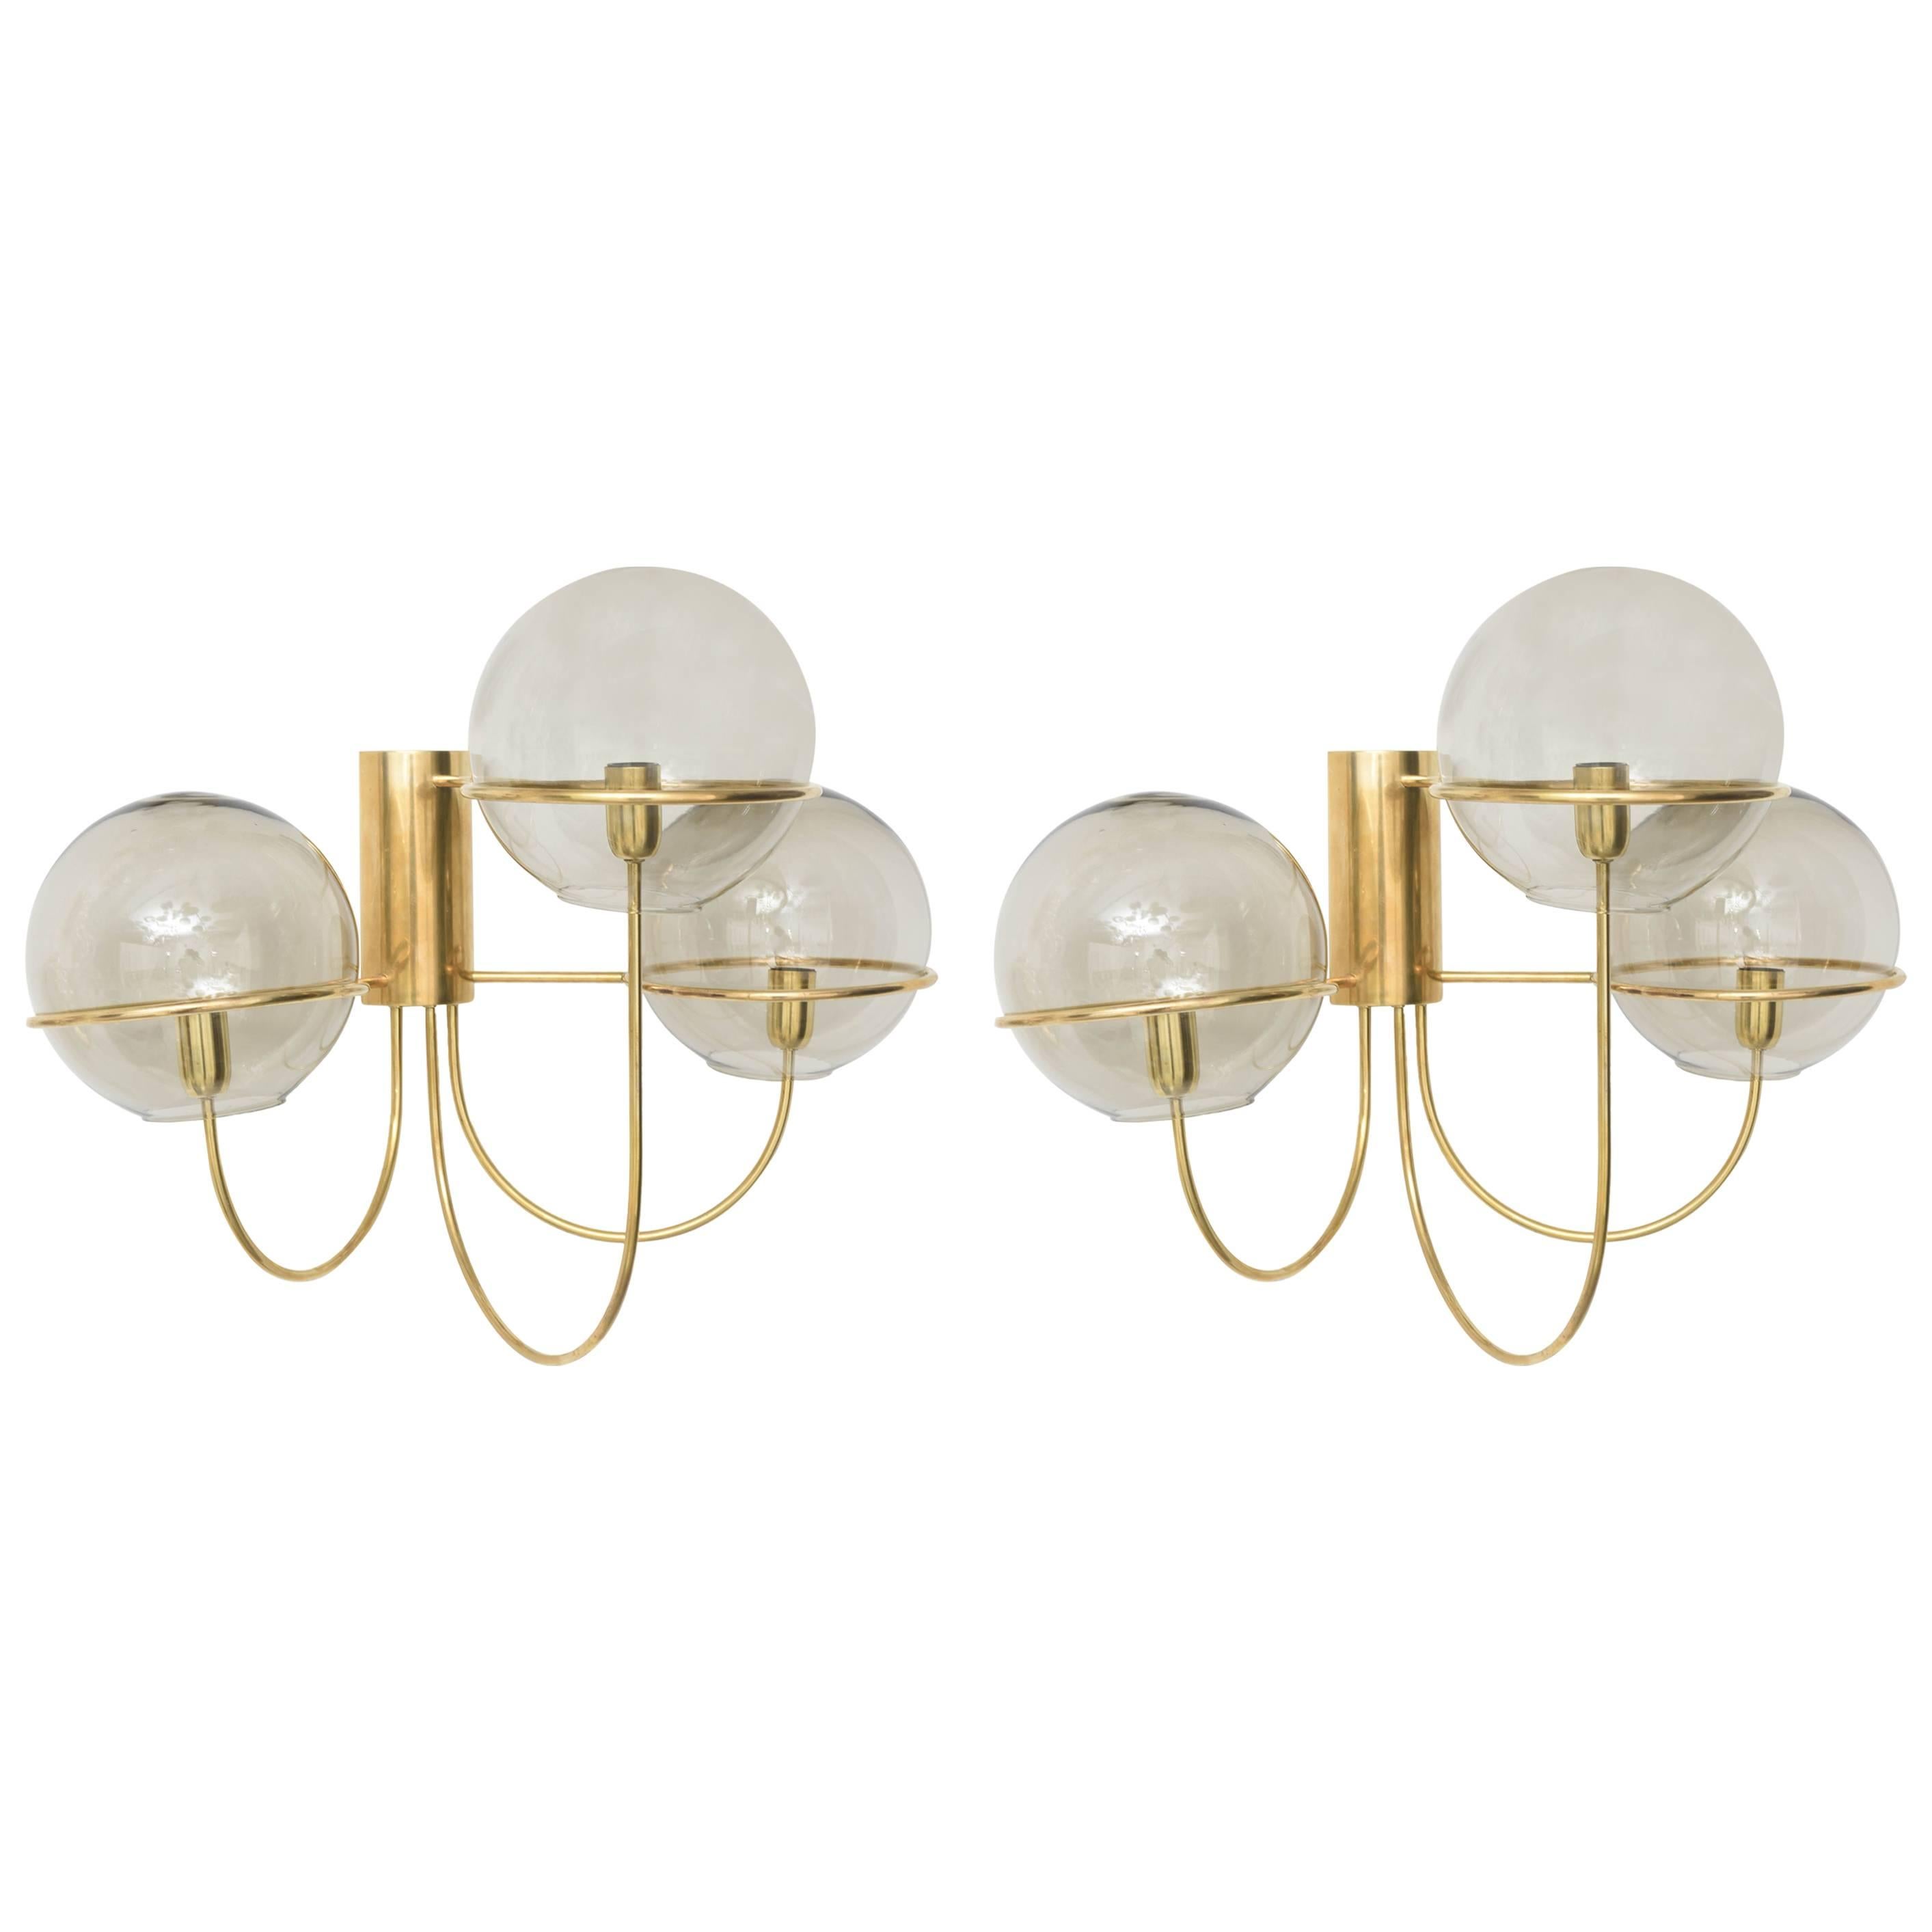 Pair of Mid-Century Modern Brass Wall Sconces, Manner of Vico Magistretti